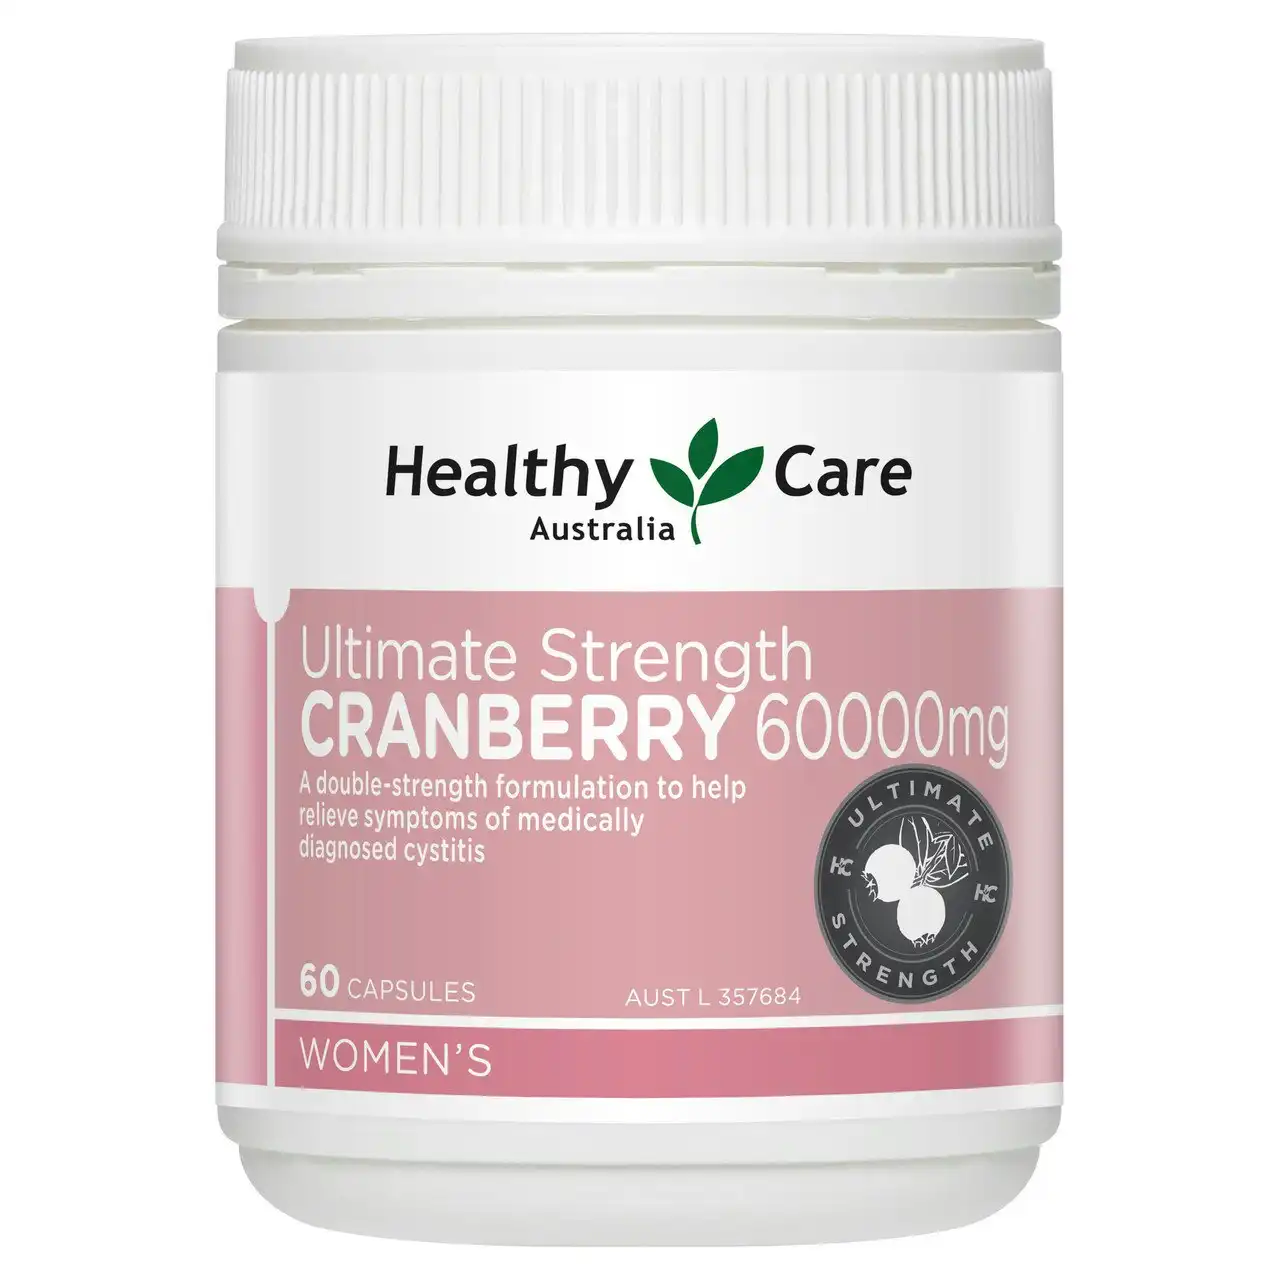 Healthy Care Ultimate Strength Cranberry 60000mg 60 Capsules